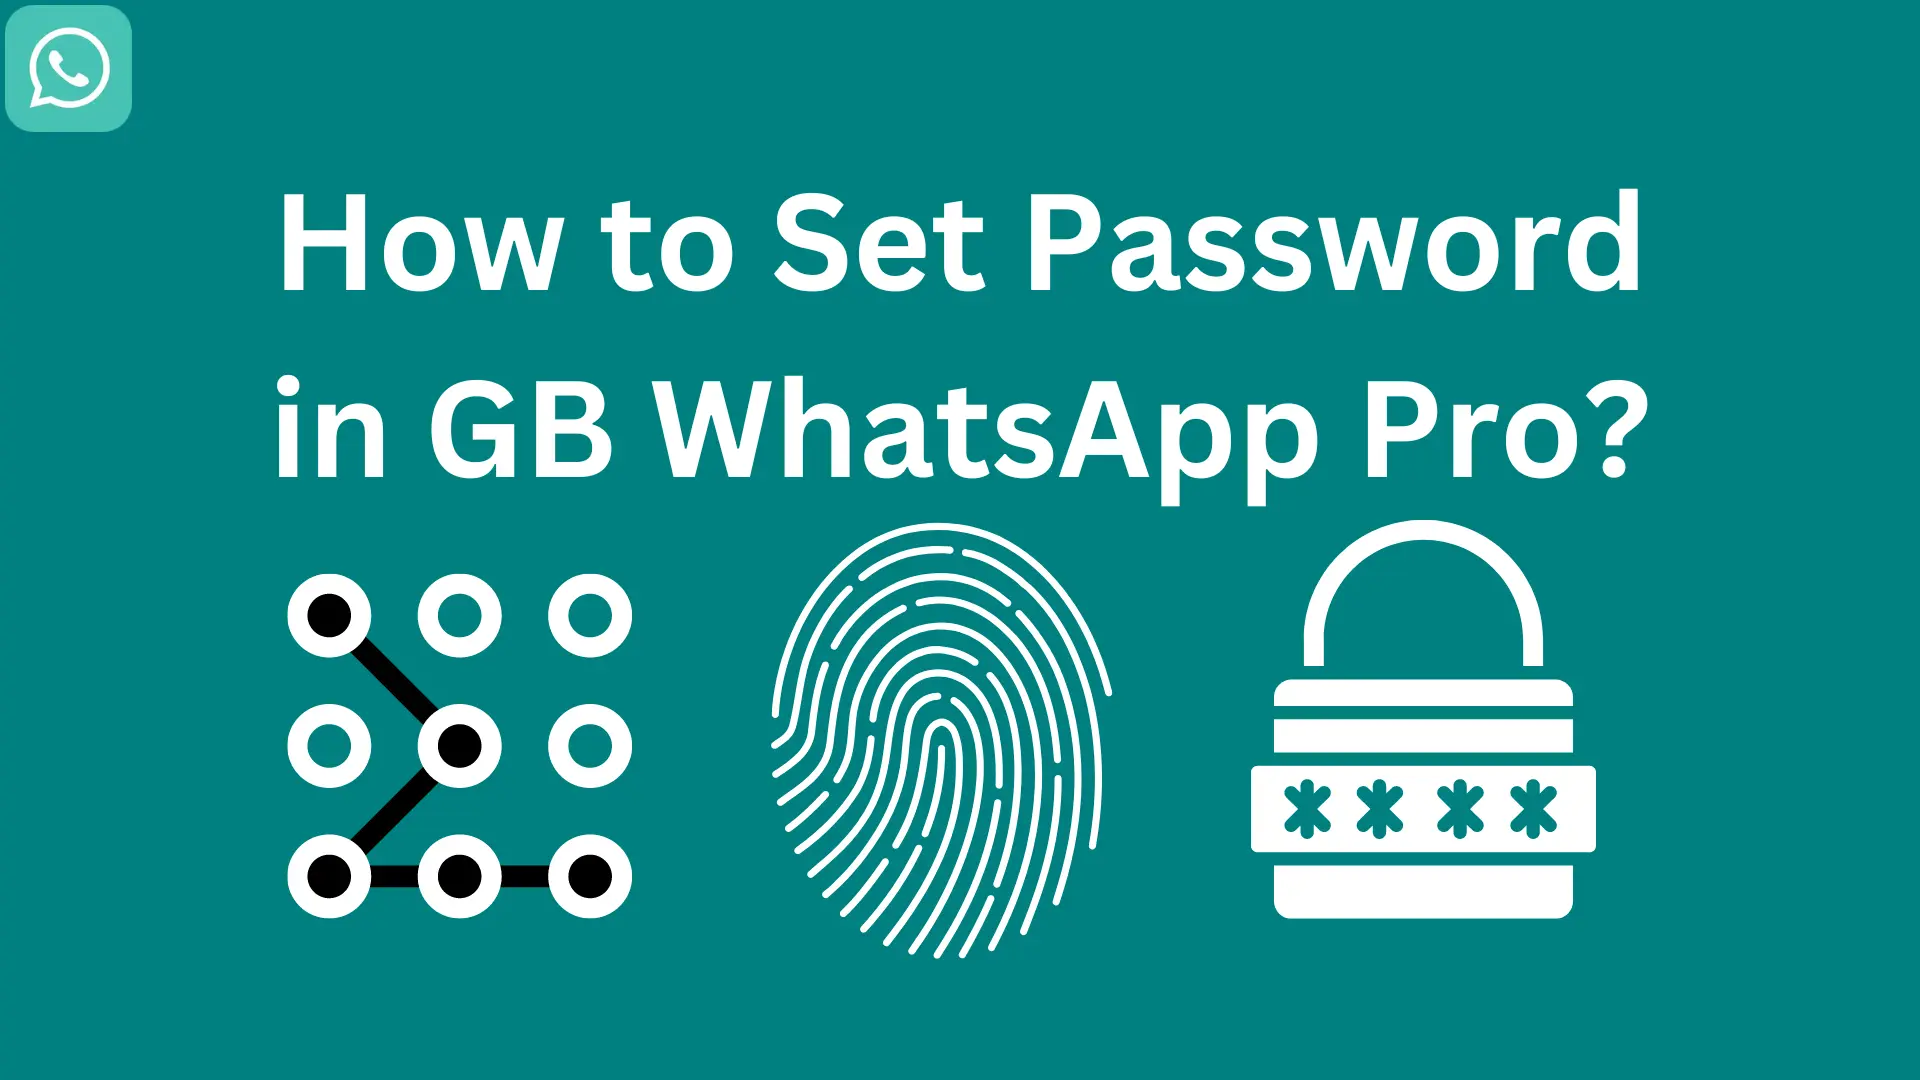 how-to-set-password-in-gb-whatsapp-pro-featured-image